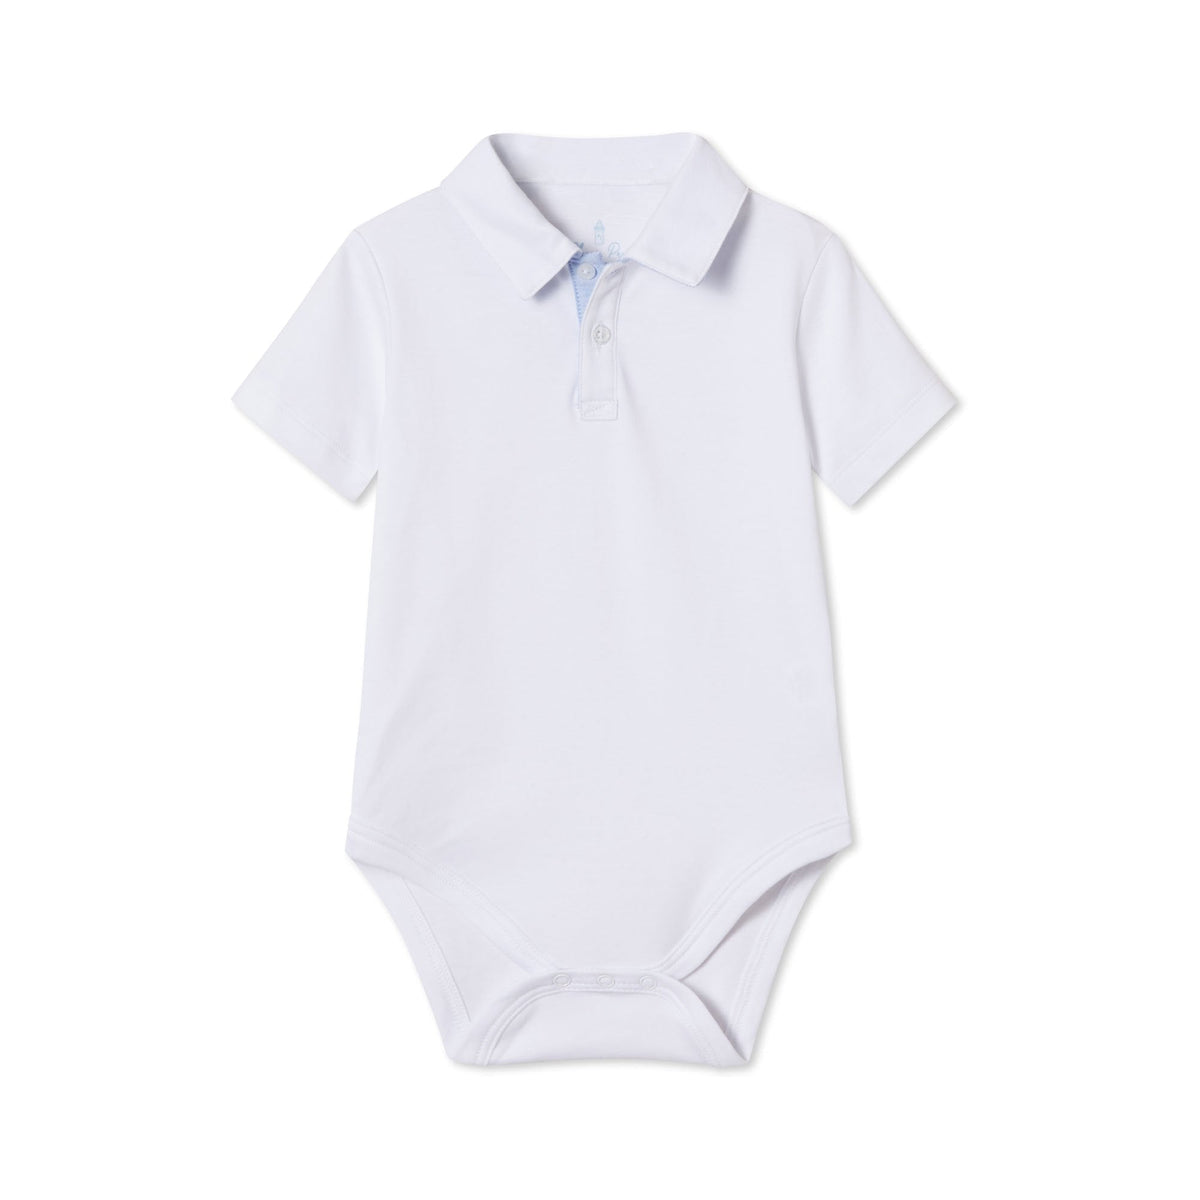 Classic and Preppy Hayes Short Sleeve Polo Onesie, Bright White with Nantucket Breeze Oxford Collar-Baby Rompers-Bright White with Nantucket Breeze Collar-0-3M-CPC - Classic Prep Childrenswear